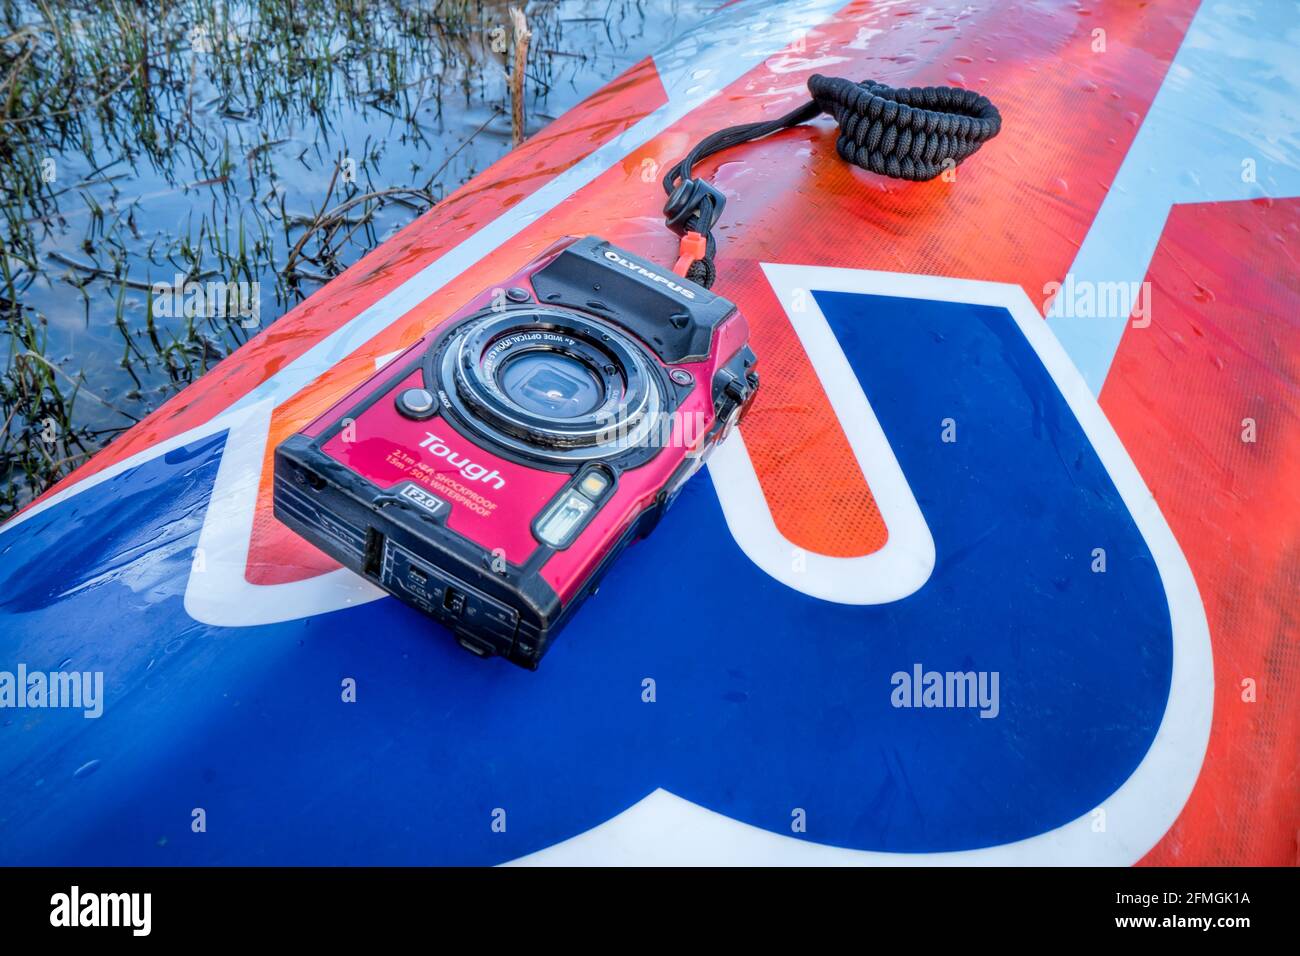 Fort Collins, CO, USA - May 4, 2021: Compact, waterproof Olympus Stylus Tough TG-5 camera on a wet deck of a stand up paddleboard by Mistral Stock Photo